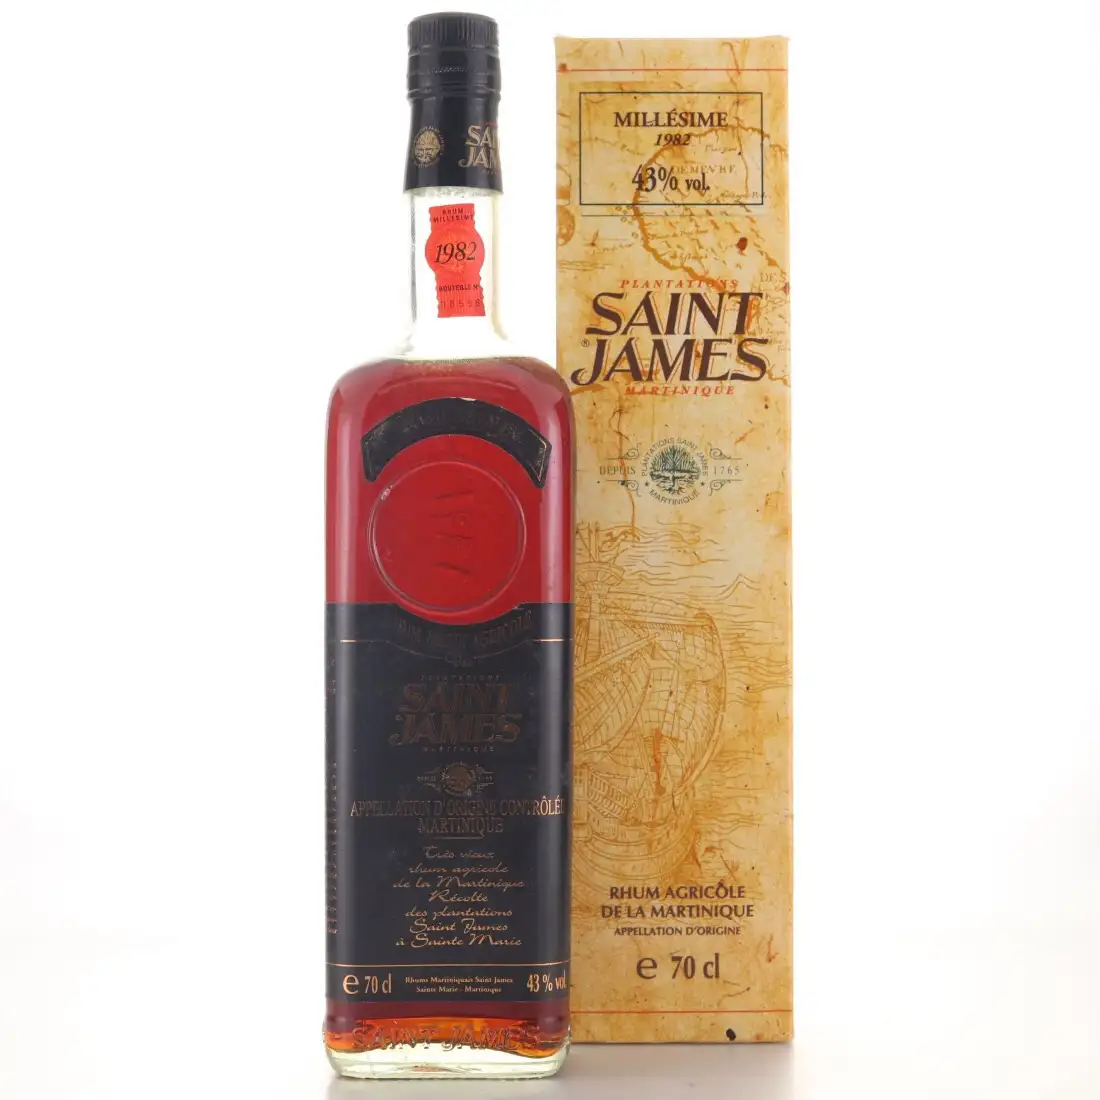 Image of the front of the bottle of the rum 1982